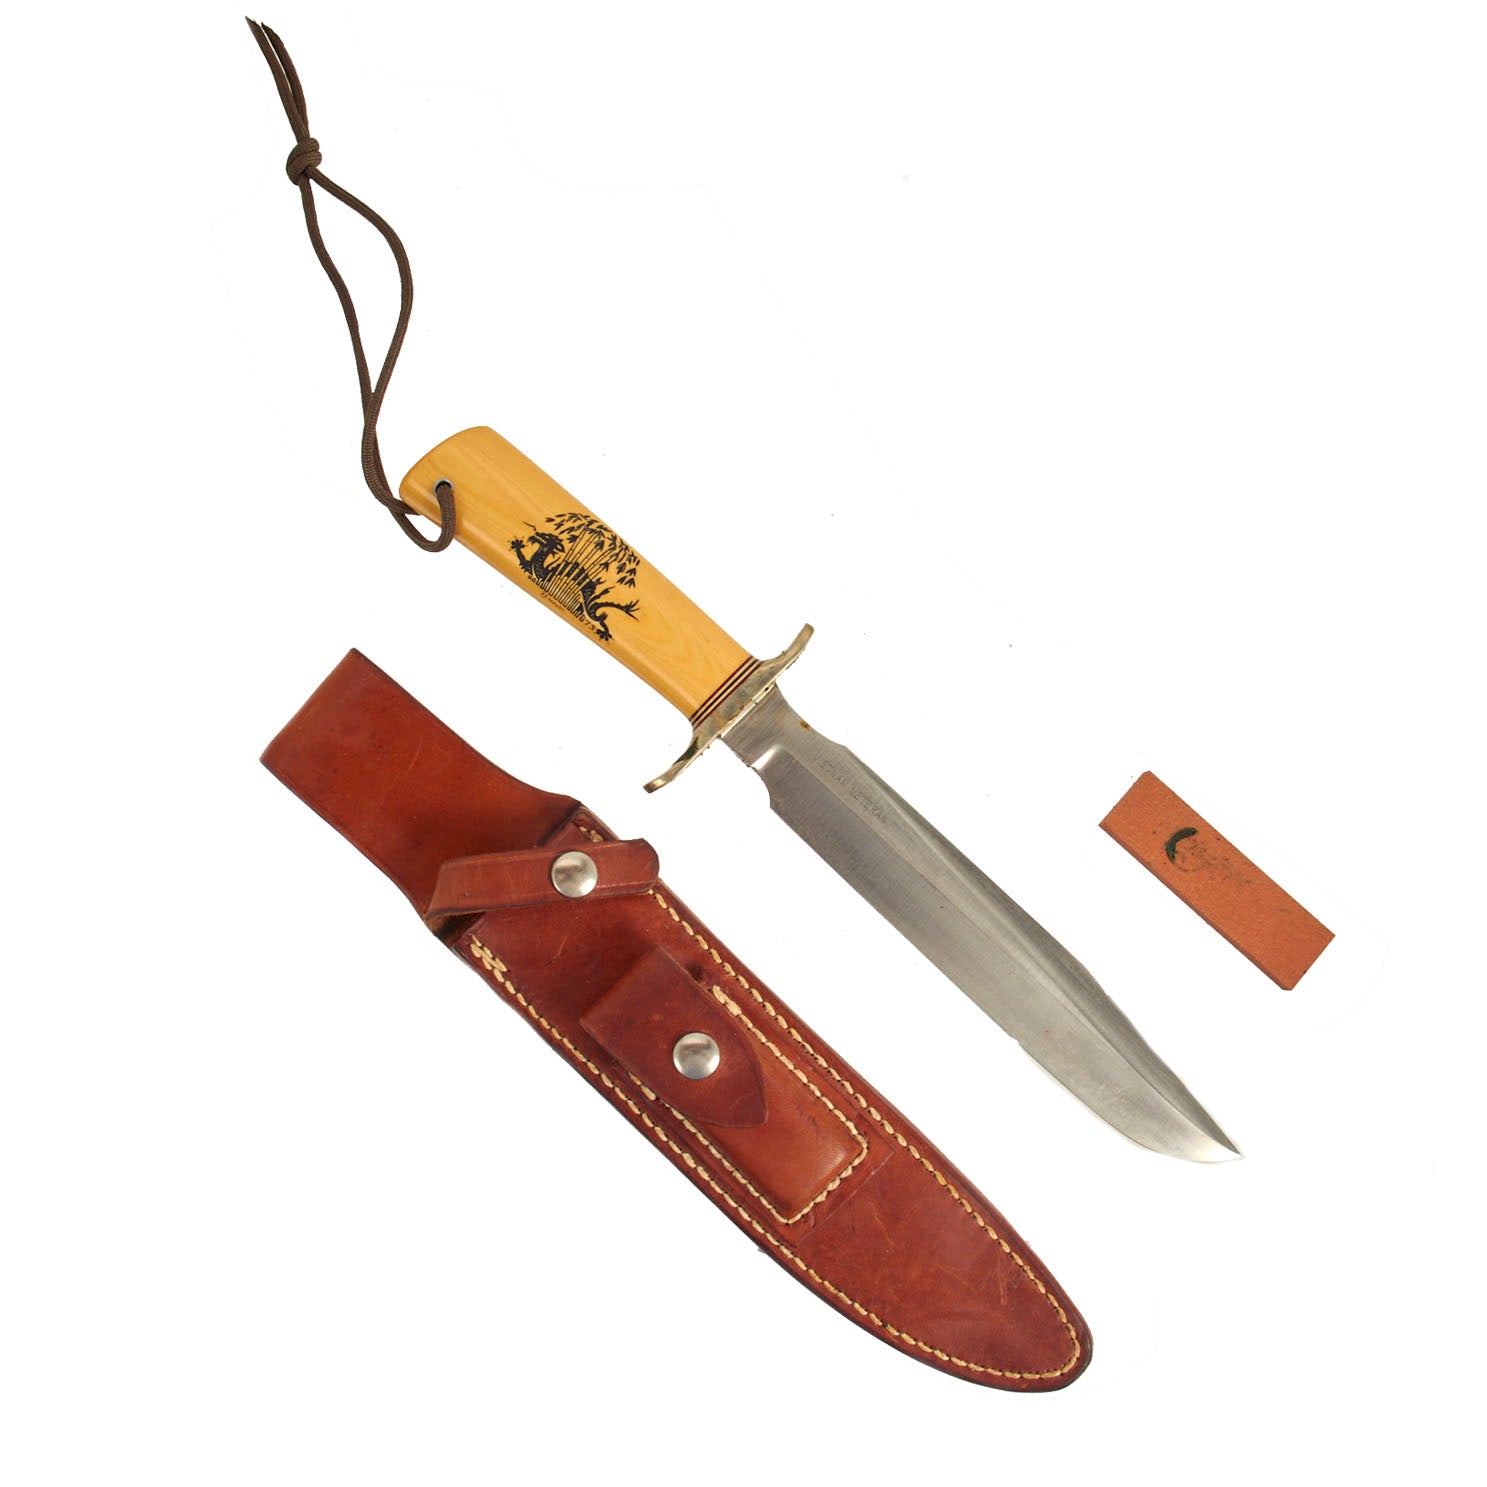 See an Iconic Randall Knife Collection